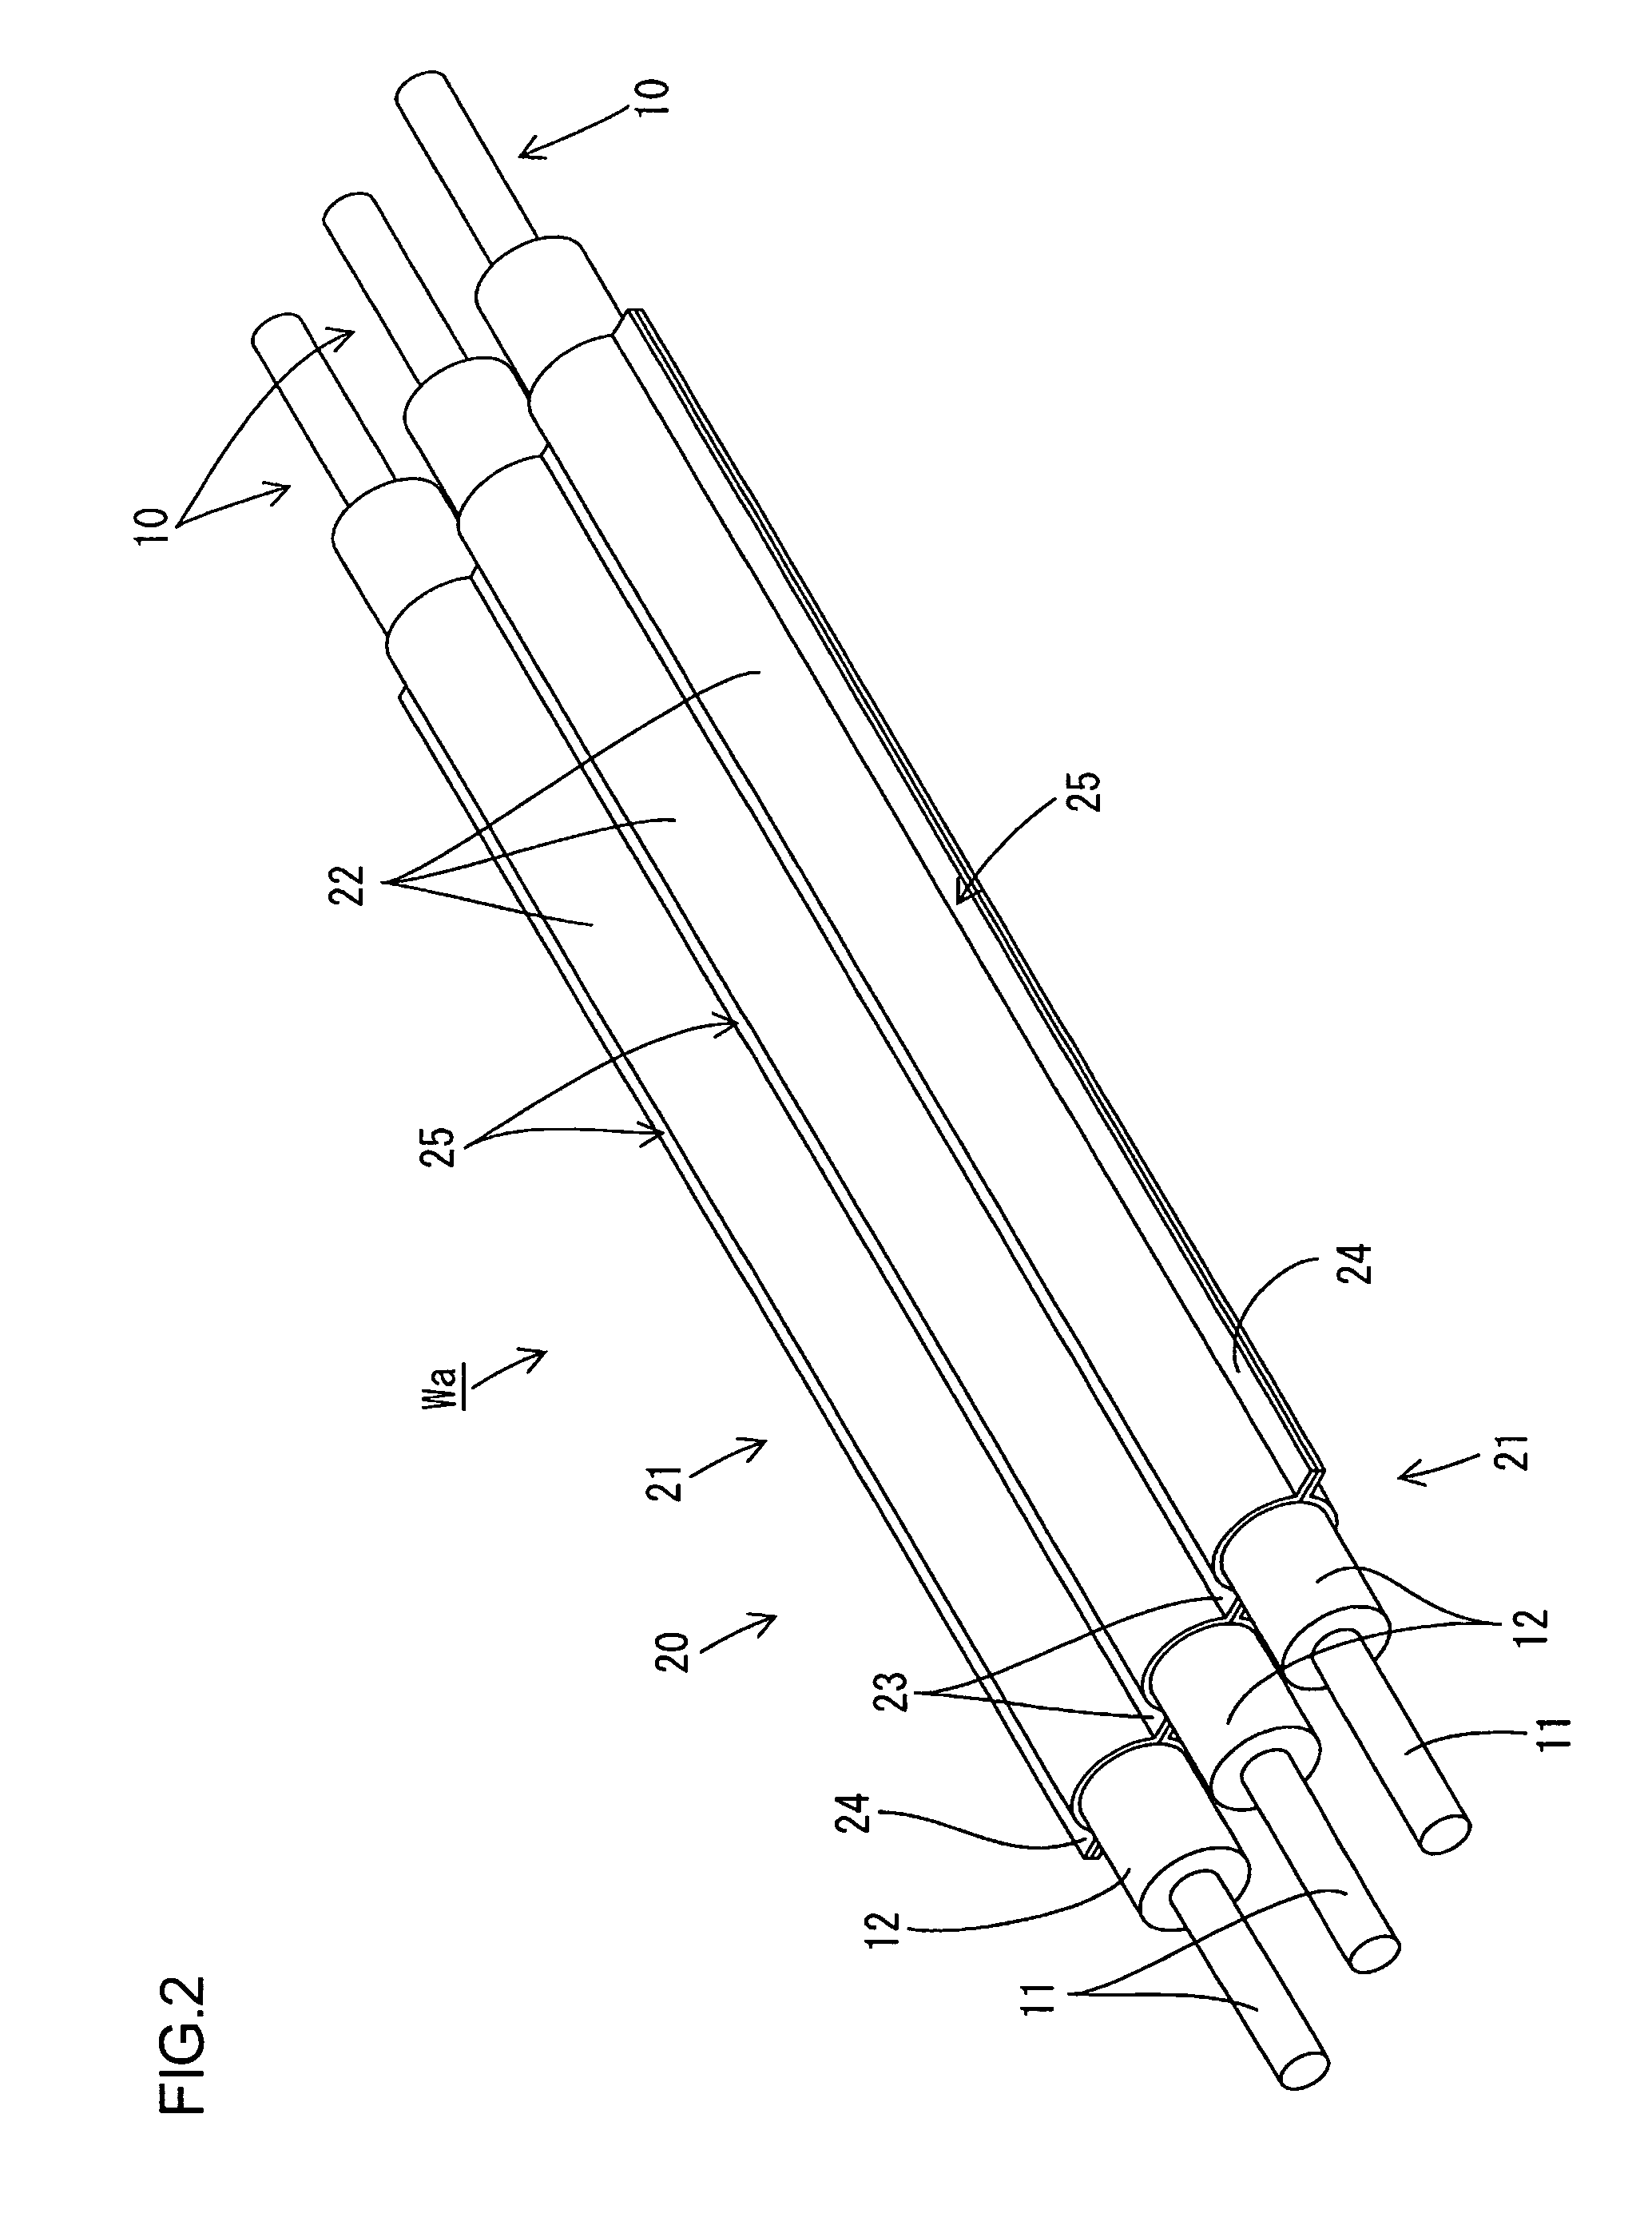 Shield conductor and shield conductor manufacturing method